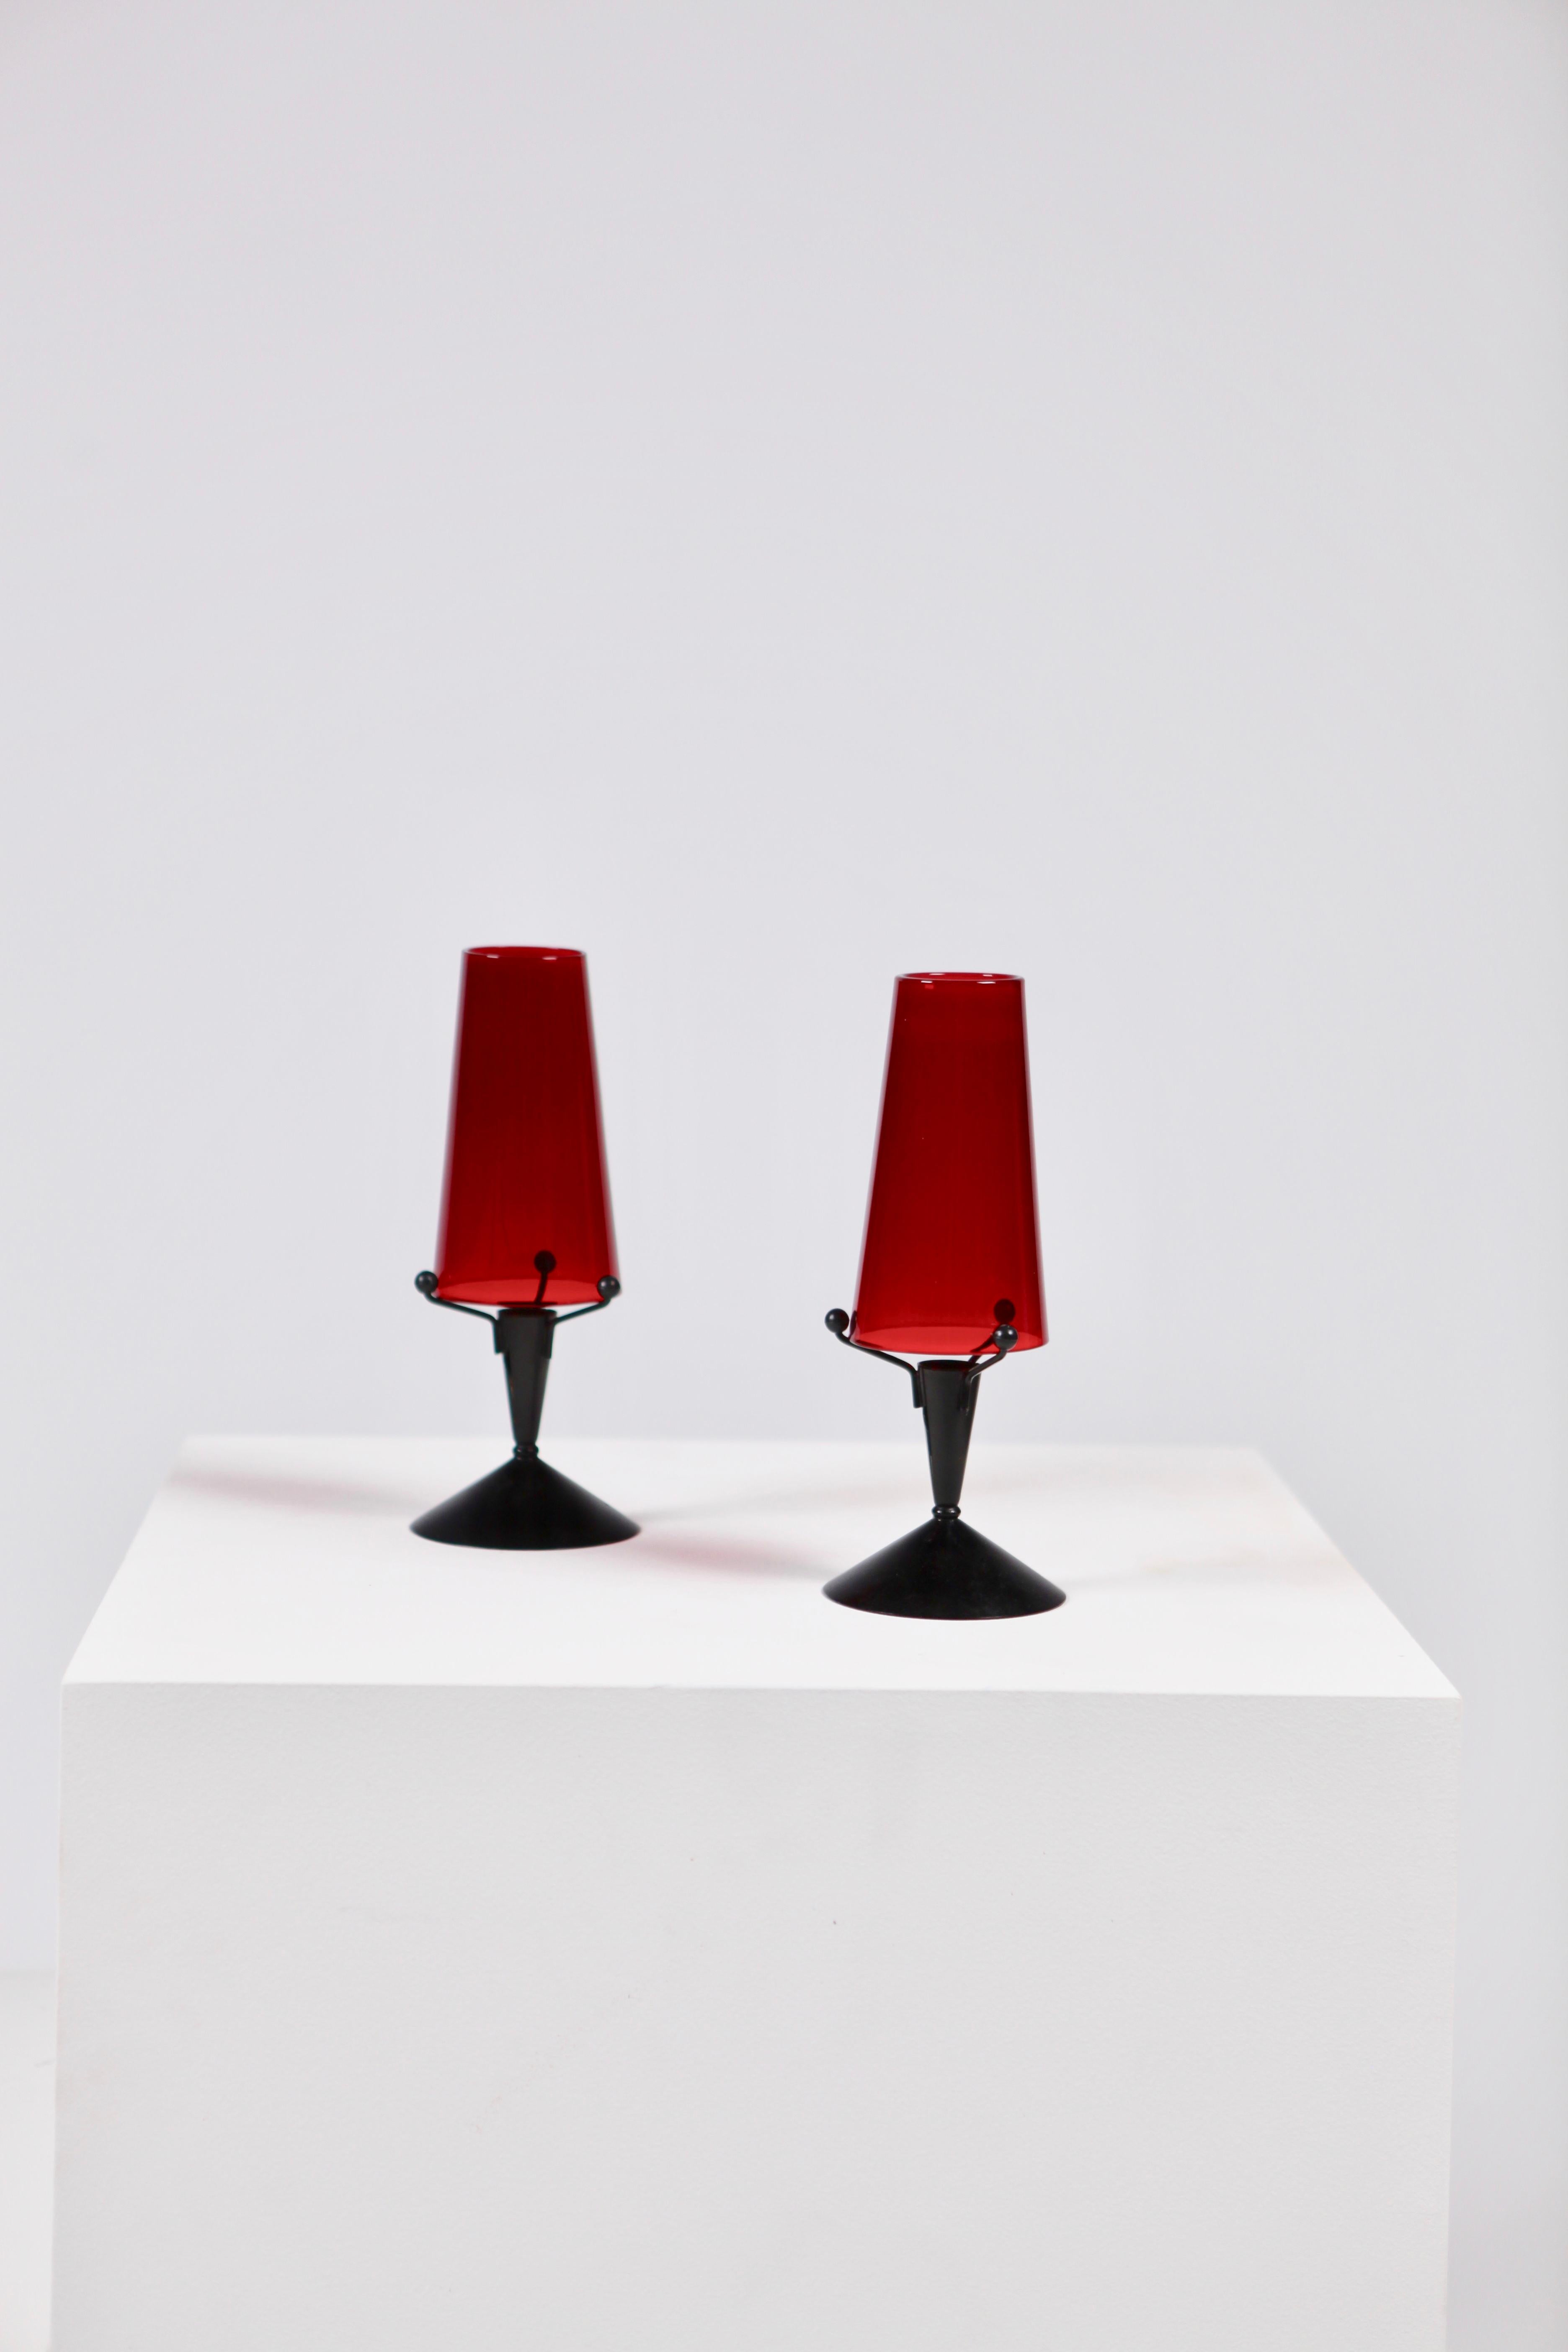 A pair of candlesticks in black metal and red glass by Gunnar Ander for Ystad Metal, Sweden.
Very good vintage condition, no chips, etc.